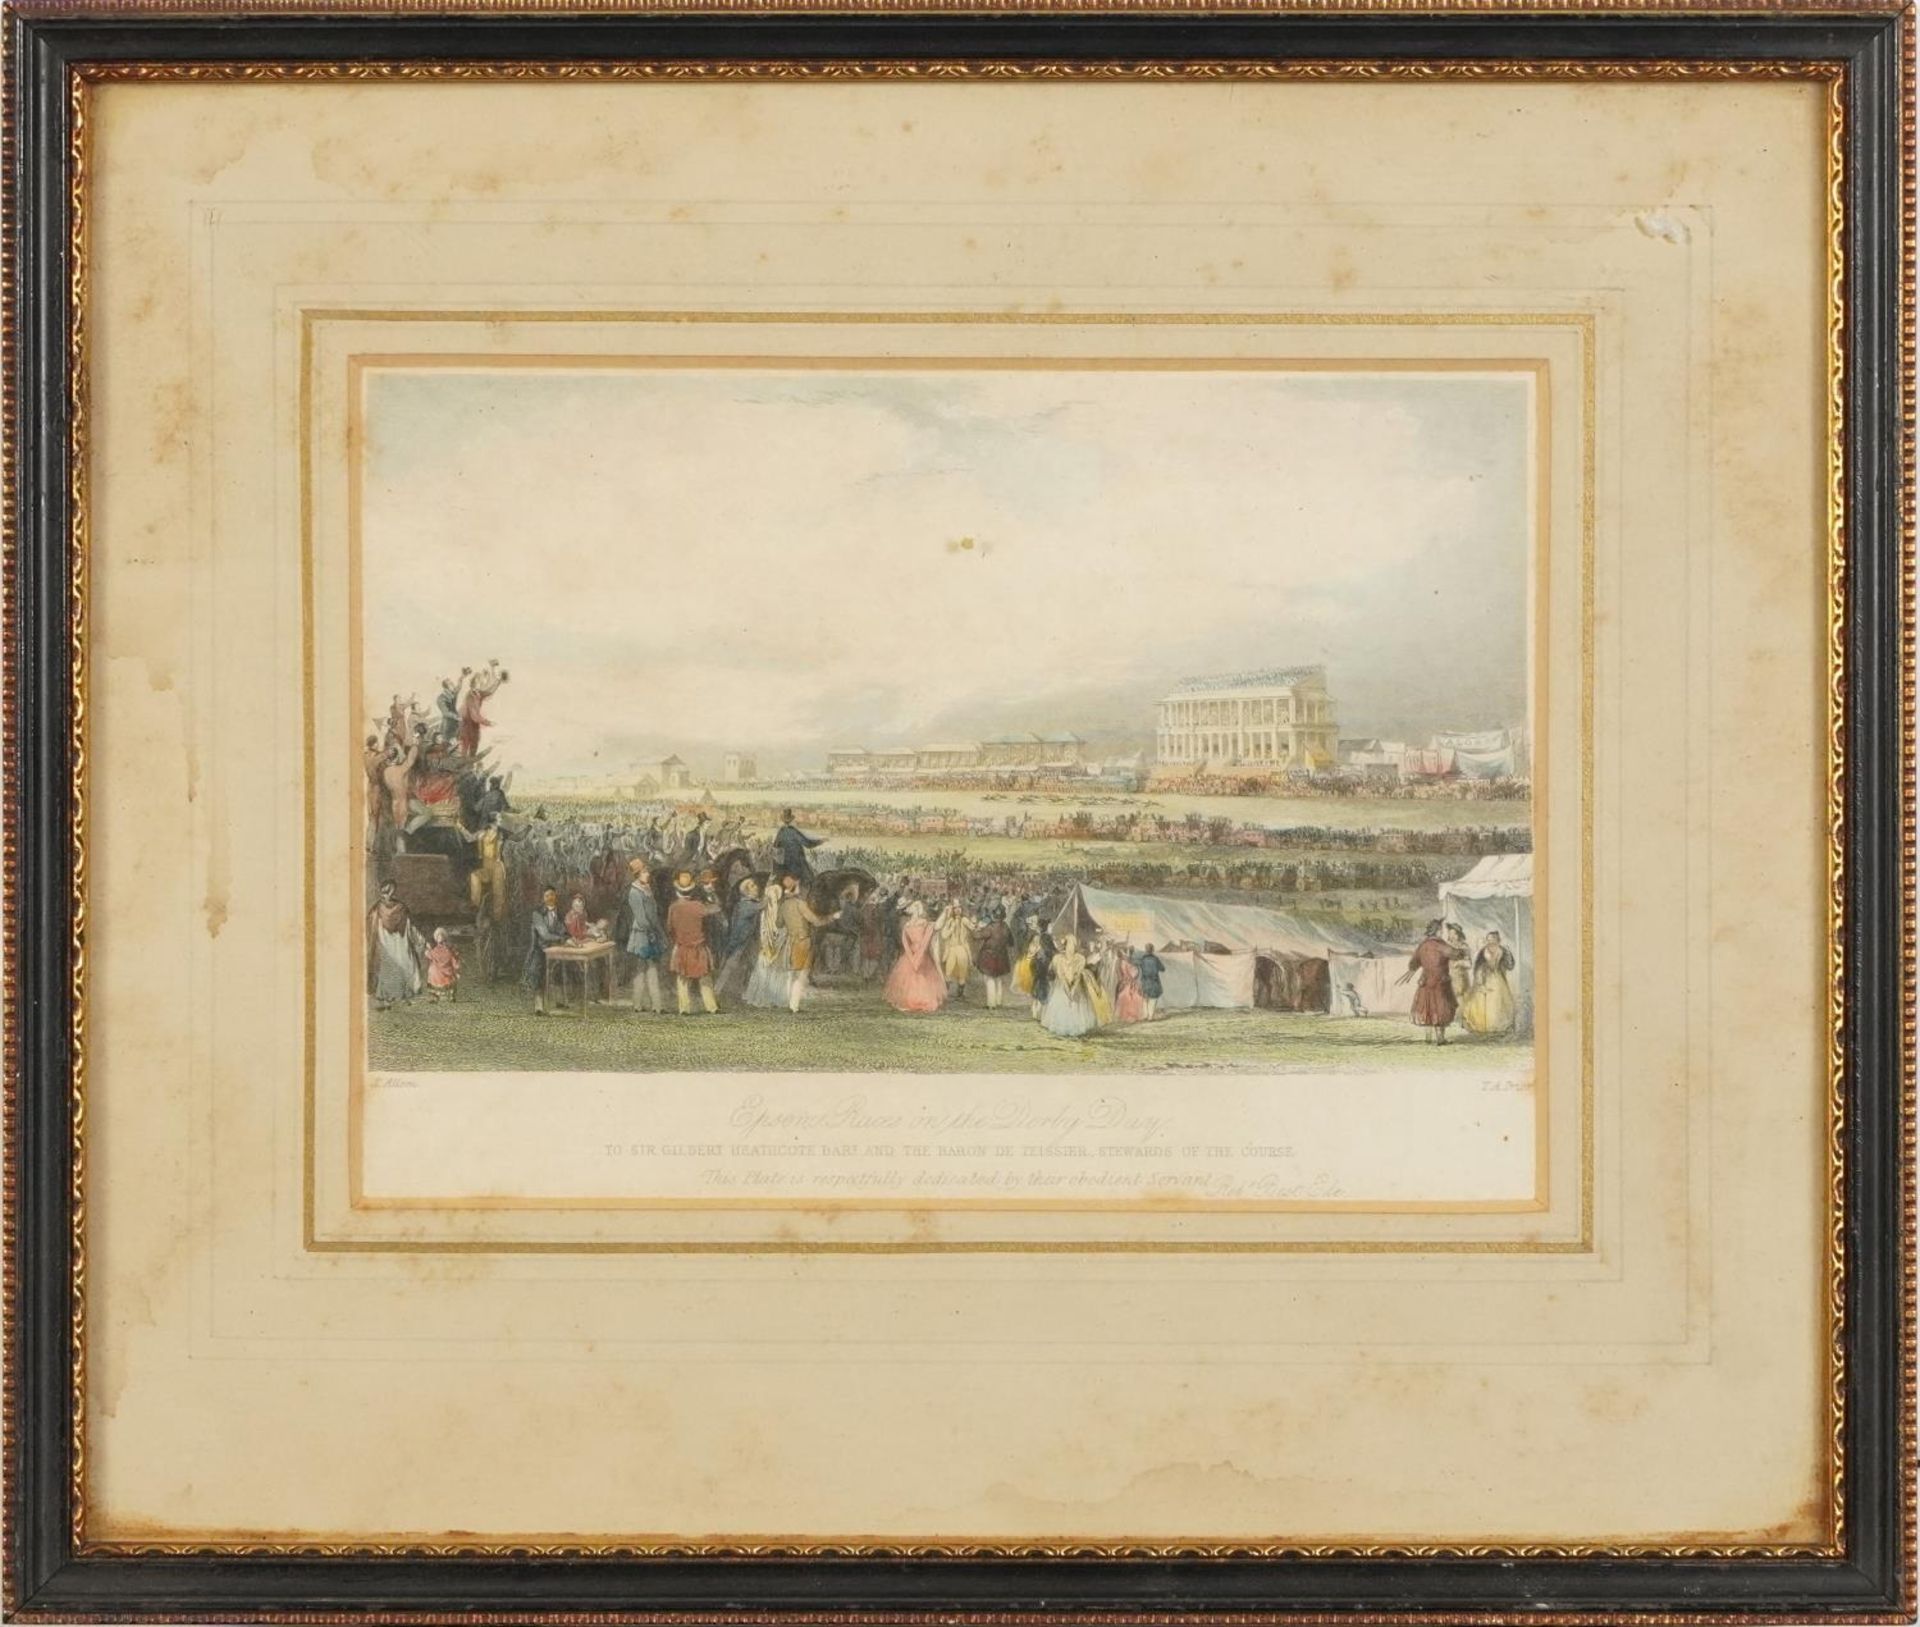 Epsom Races on Derby Day and Woodcote Park, two 19th century engravings, one after Thomas Allom - Image 7 of 9